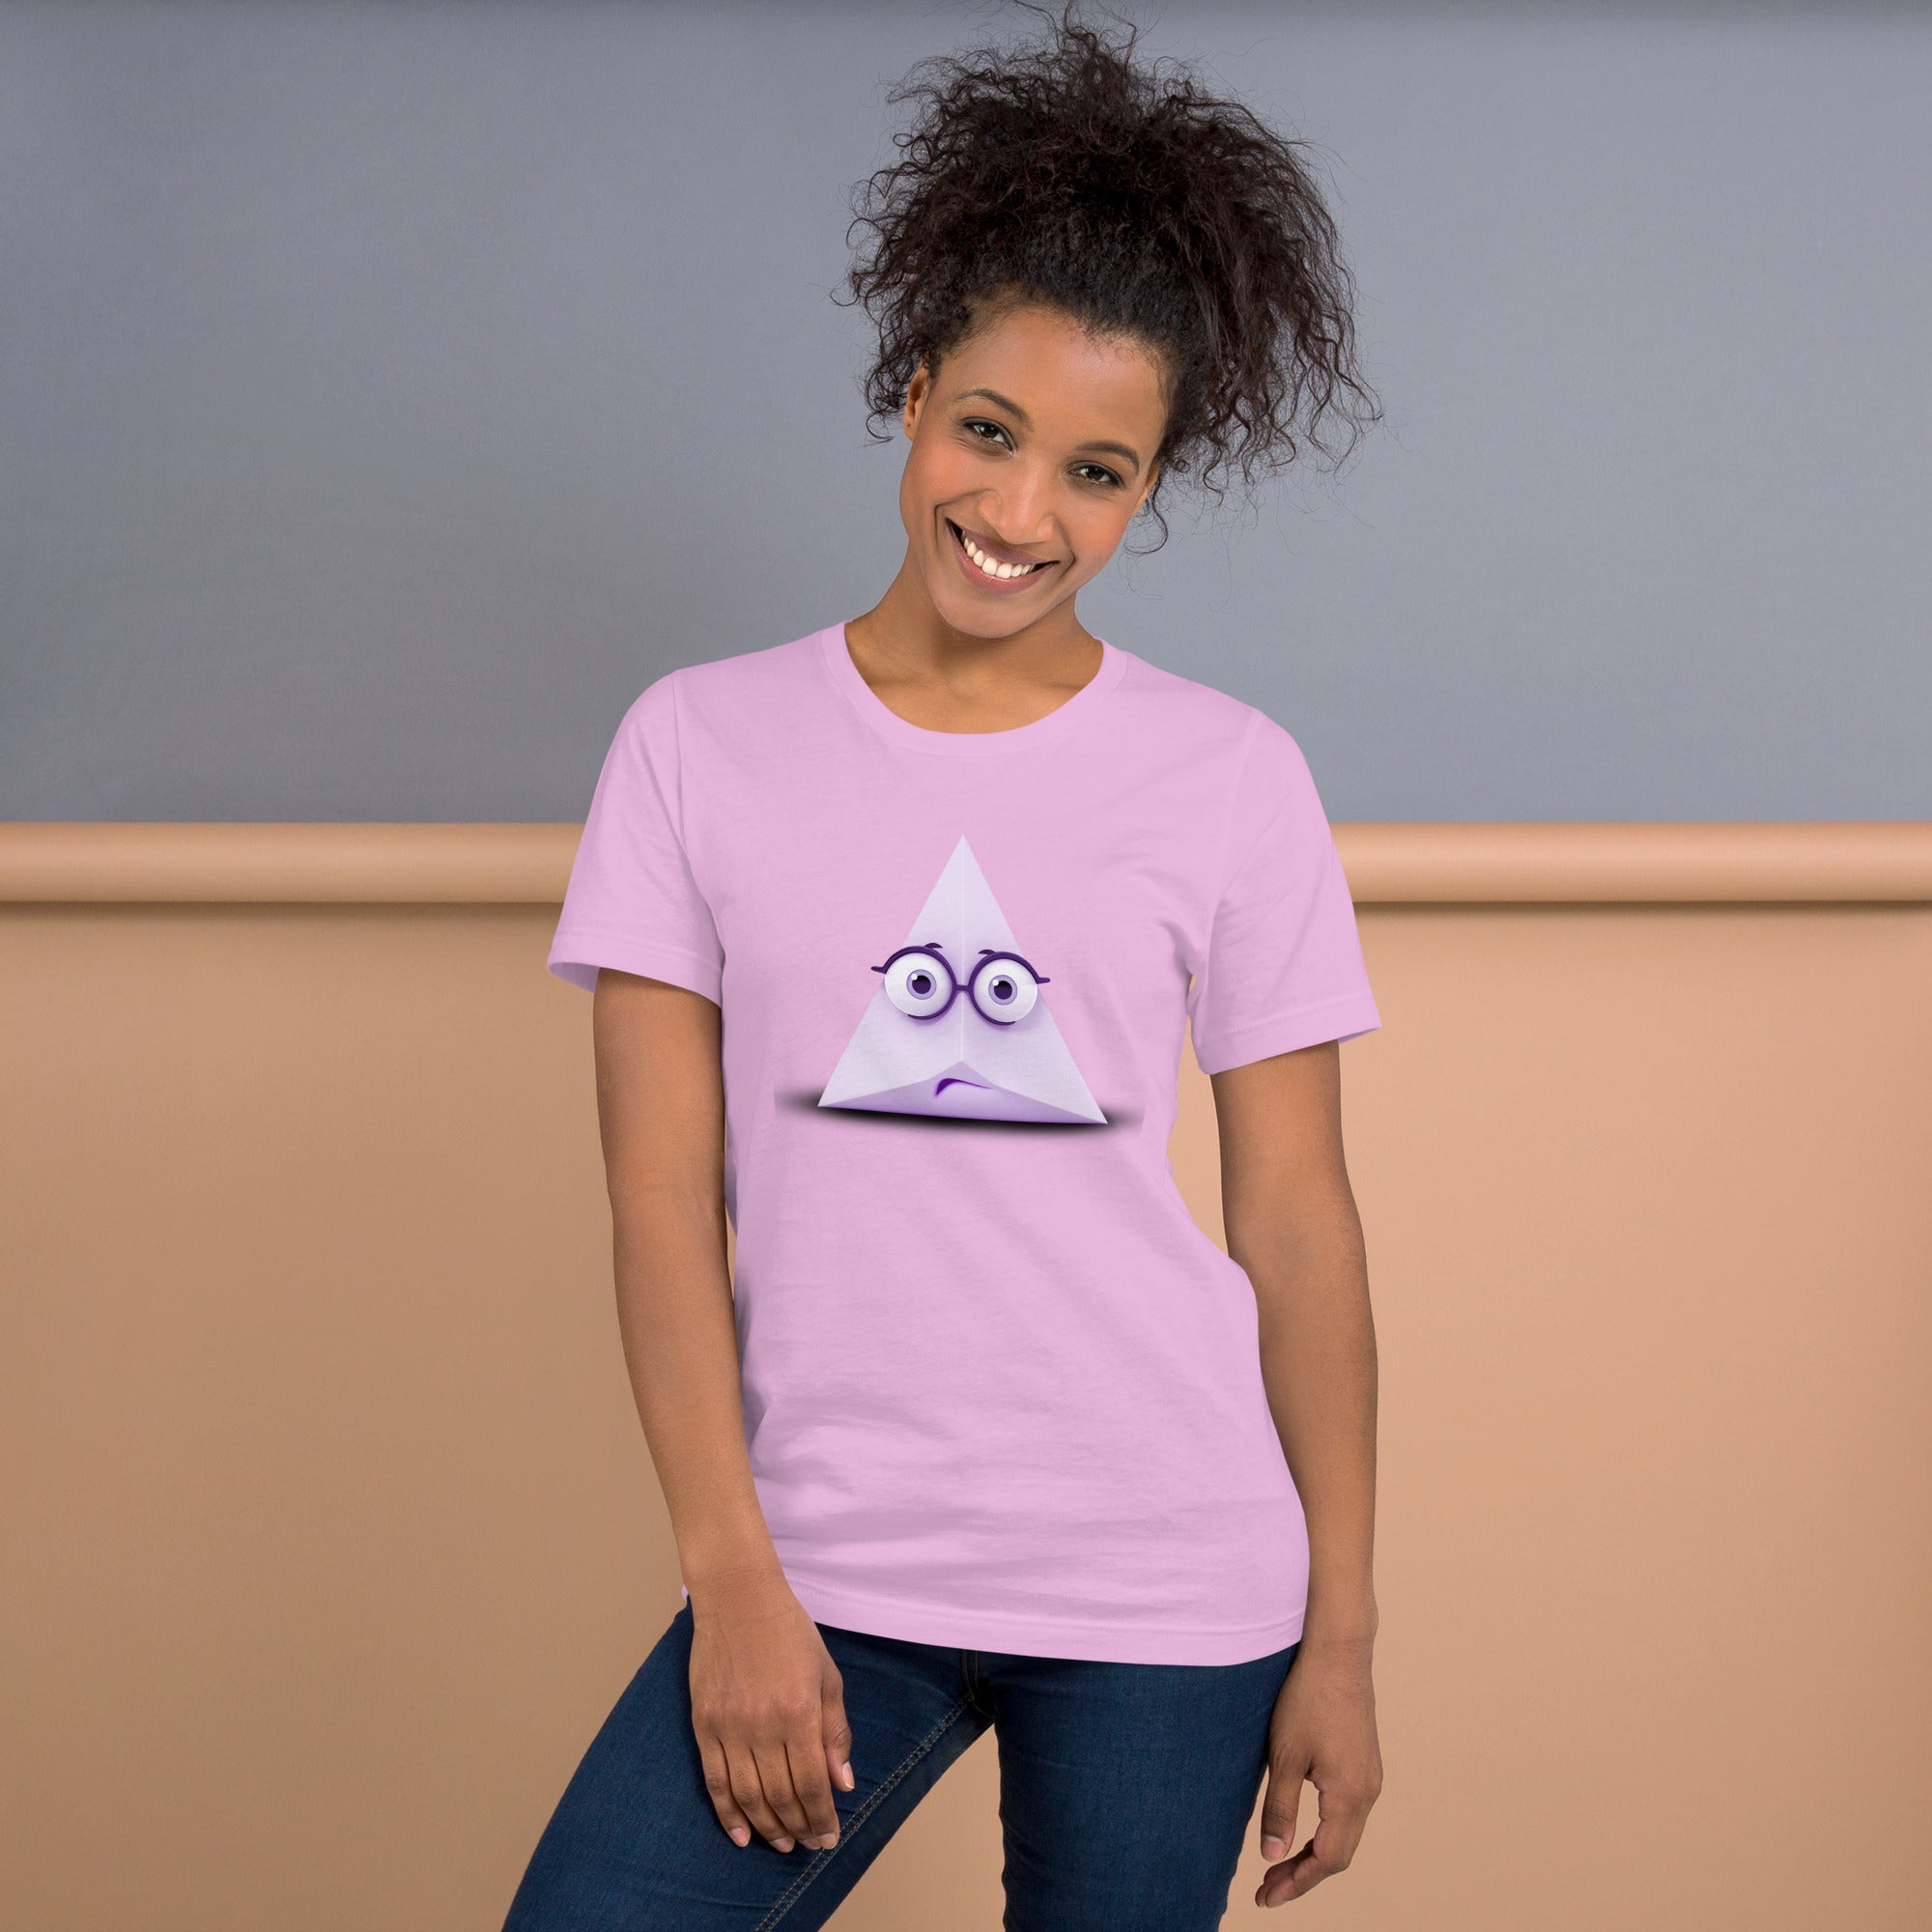 Comfortable Unisex Tee with Crying Face Emoji Print